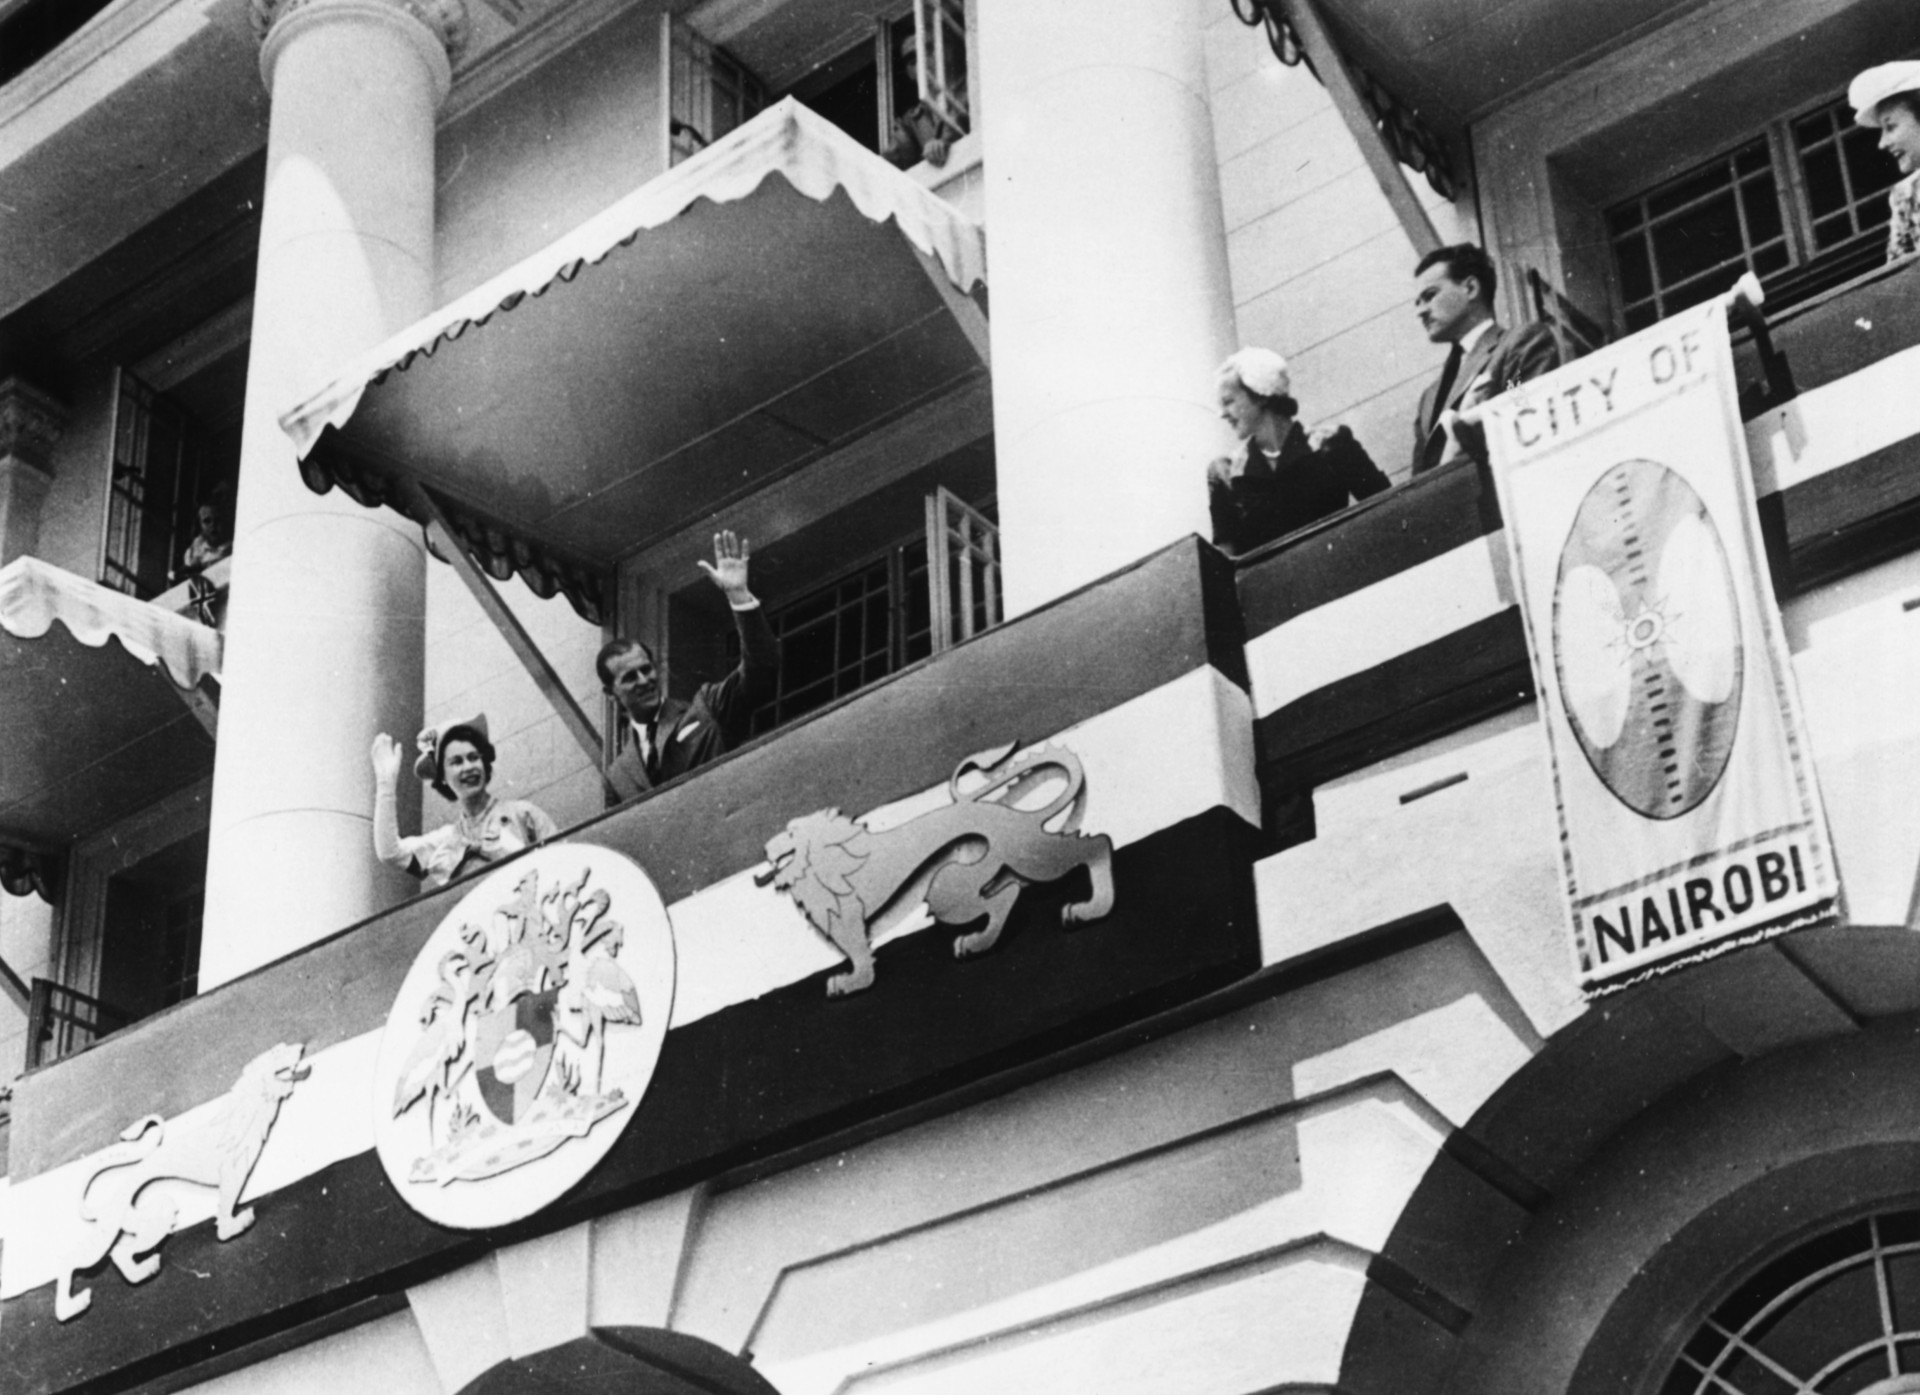 Waving at crowds from the balcony of City Hall, Nairobi.<p><a href="https://www.msn.com/en-nz/community/channel/vid-7xx8mnucu55yw63we9va2gwr7uihbxwc68fxqp25x6tg4ftibpra?cvid=94631541bc0f4f89bfd59158d696ad7e">Follow us and access great exclusive content every day</a></p>